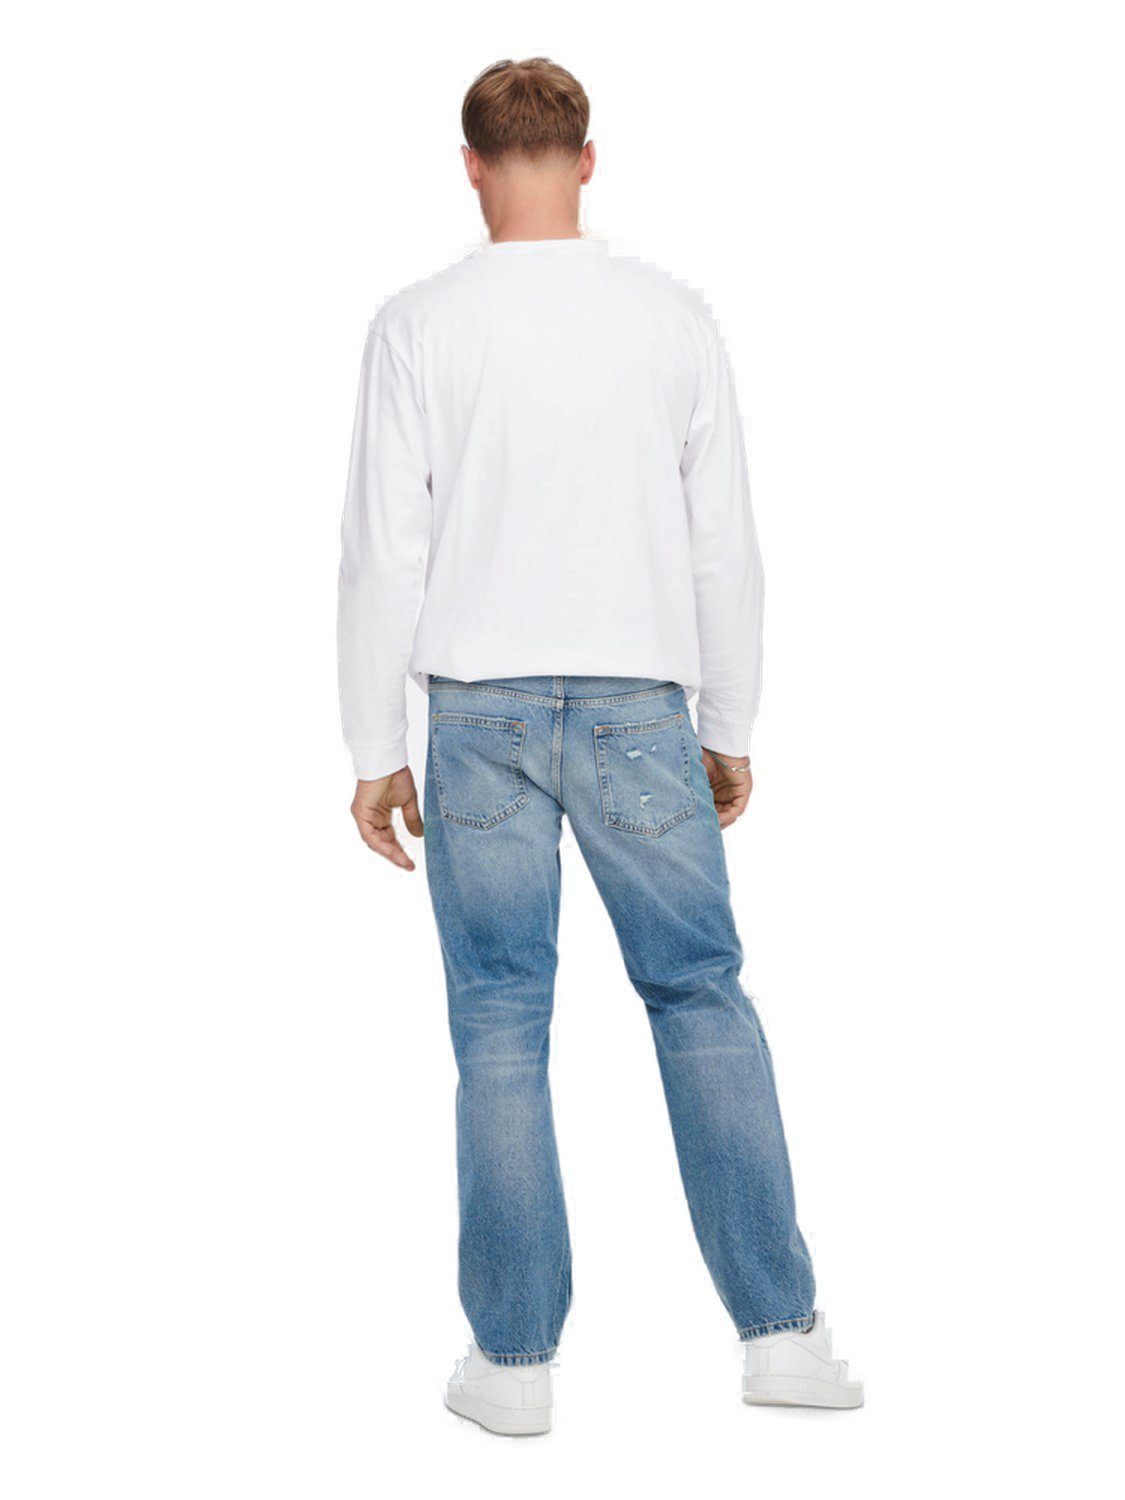 ONSEDGE LOOSE aus SONS ONLY & 4067 Relax-fit-Jeans Baumwolle